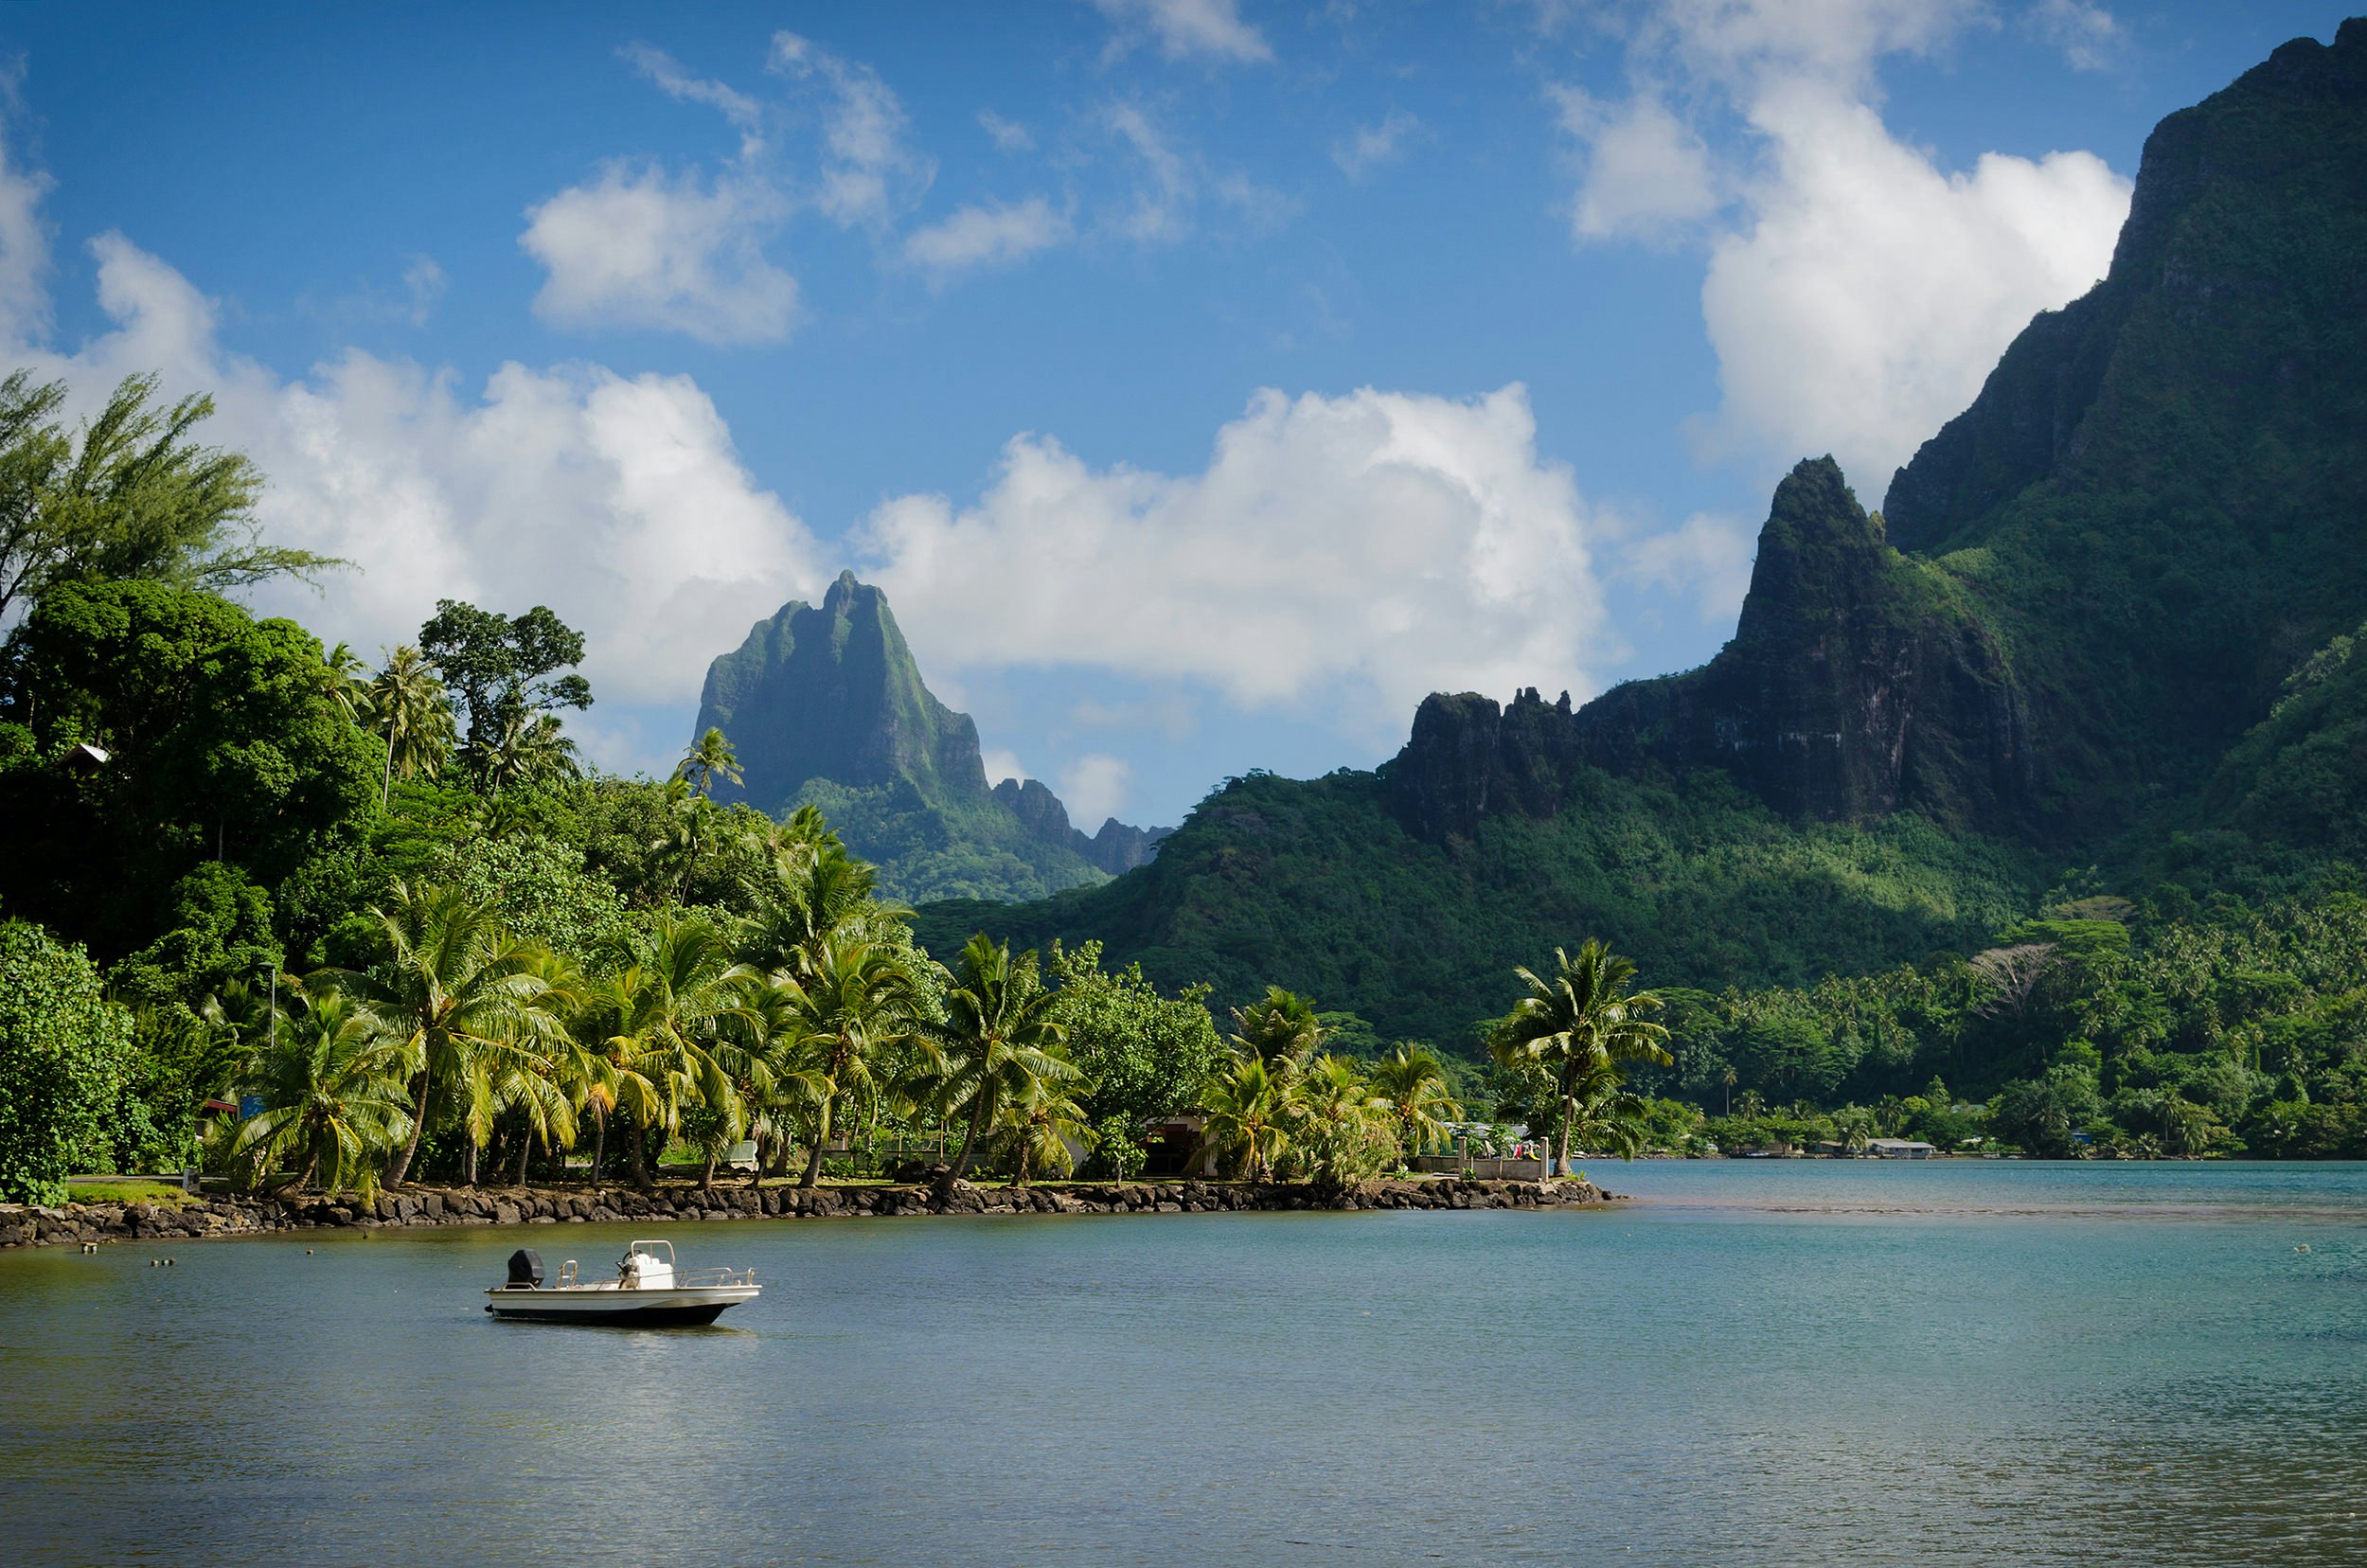 The tropical-forest-covered peaks of Mo'orea Island; a small boat is stationary in the water just off the shore.